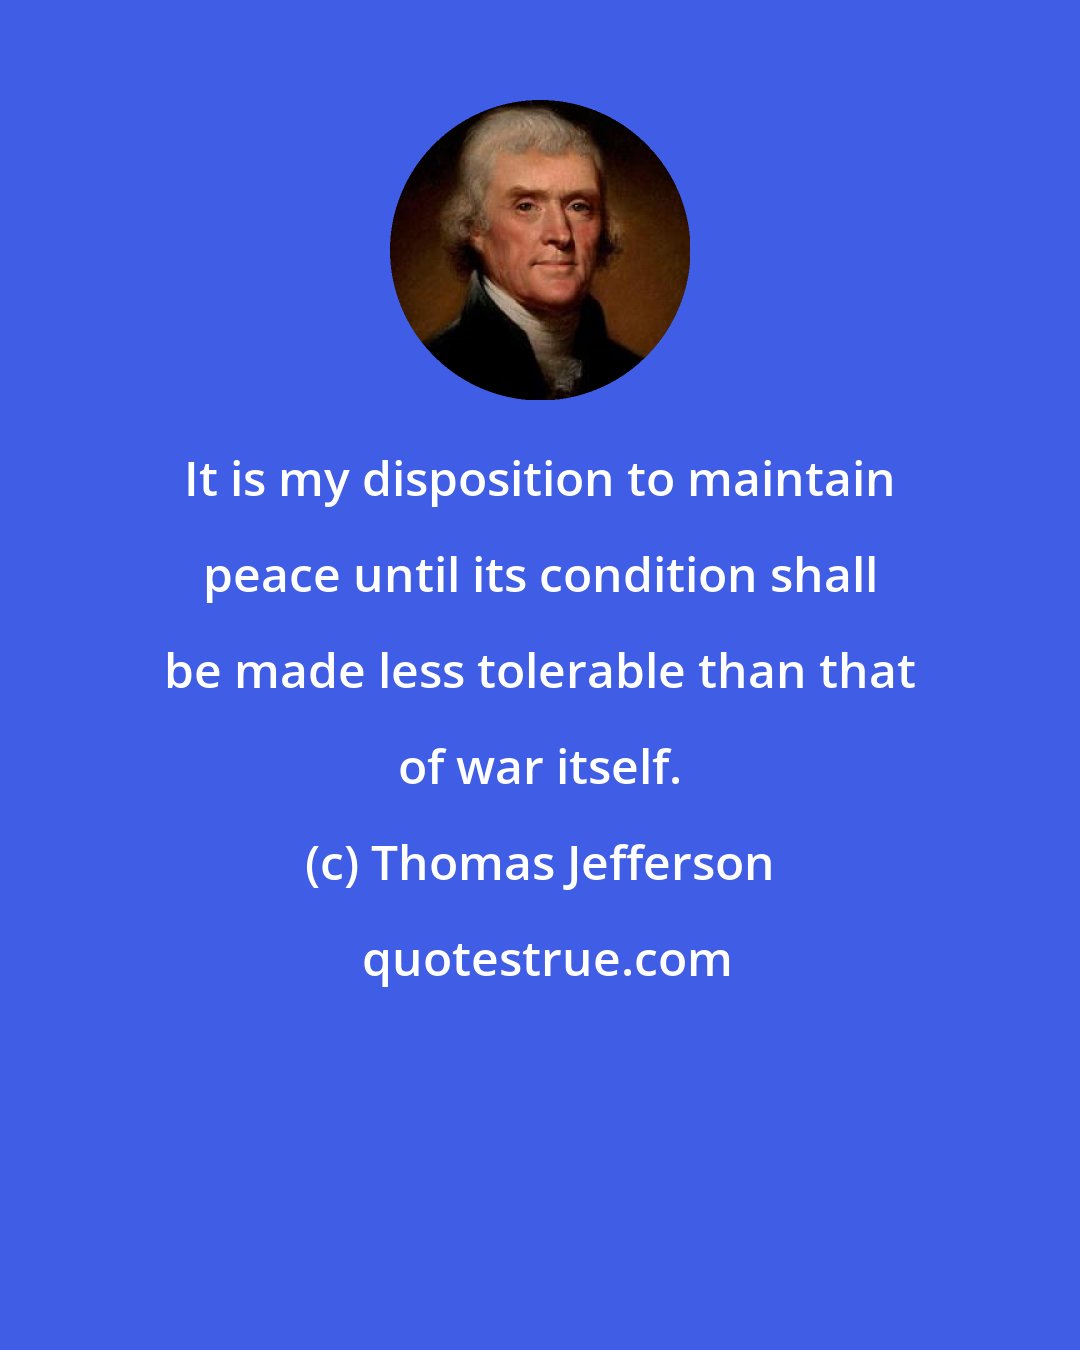 Thomas Jefferson: It is my disposition to maintain peace until its condition shall be made less tolerable than that of war itself.